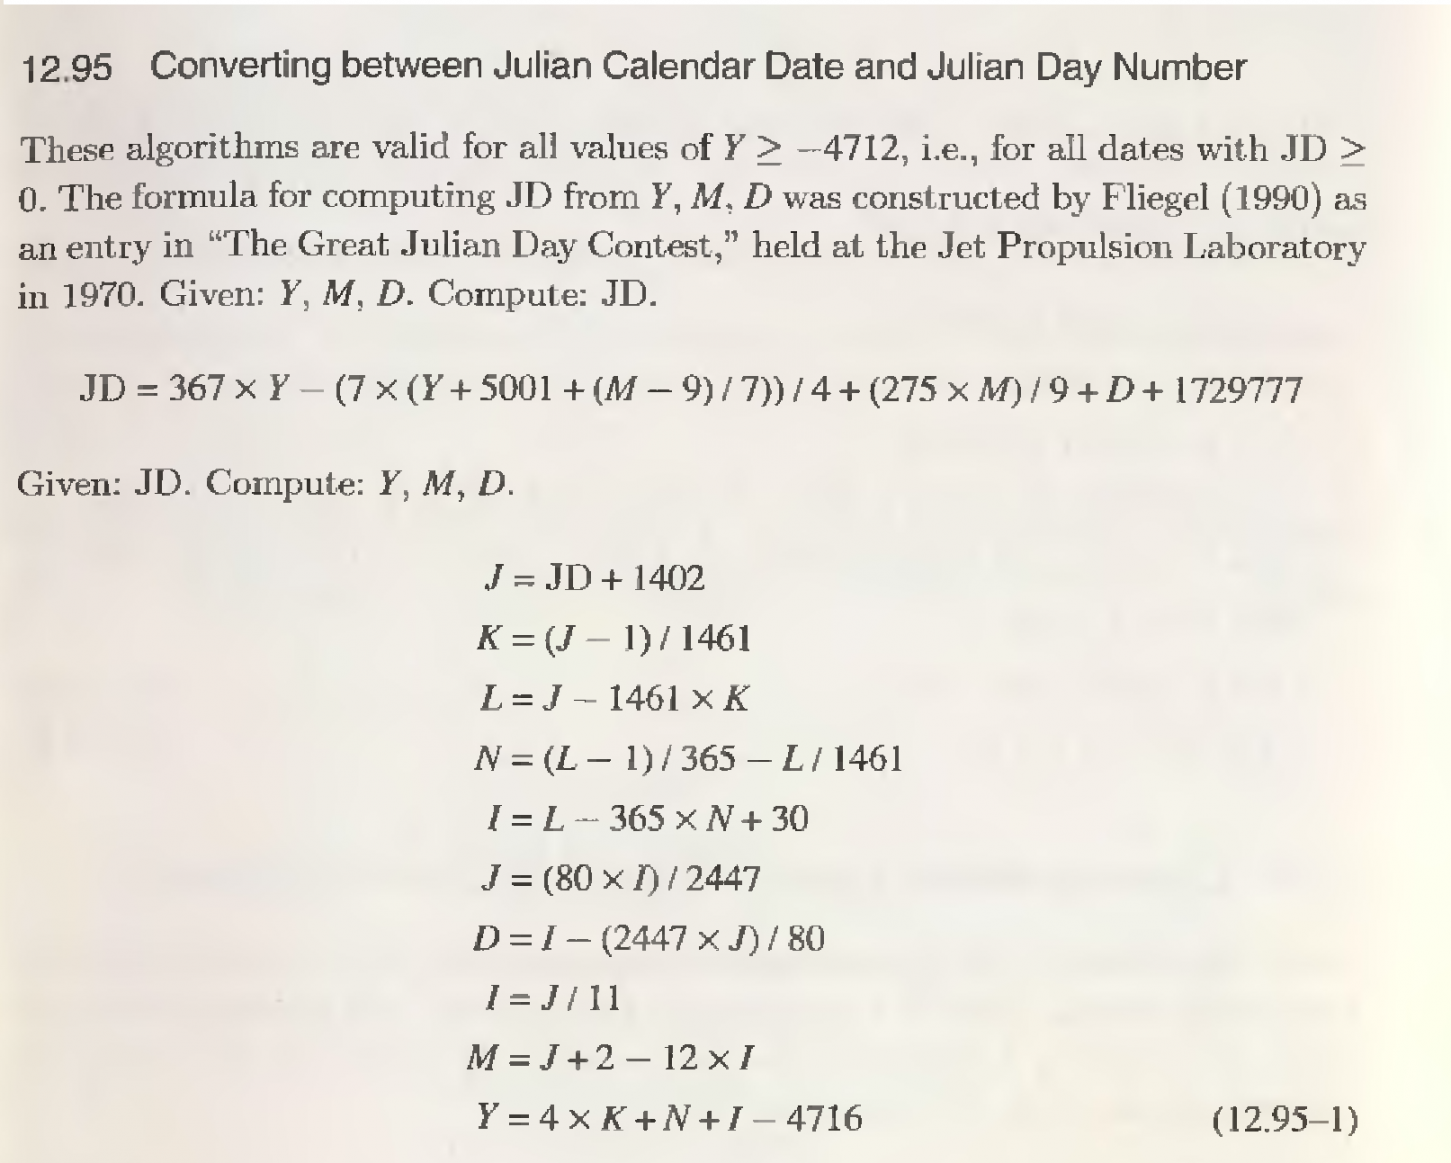 algorithm - Calculation of Julian day is off for negative dates